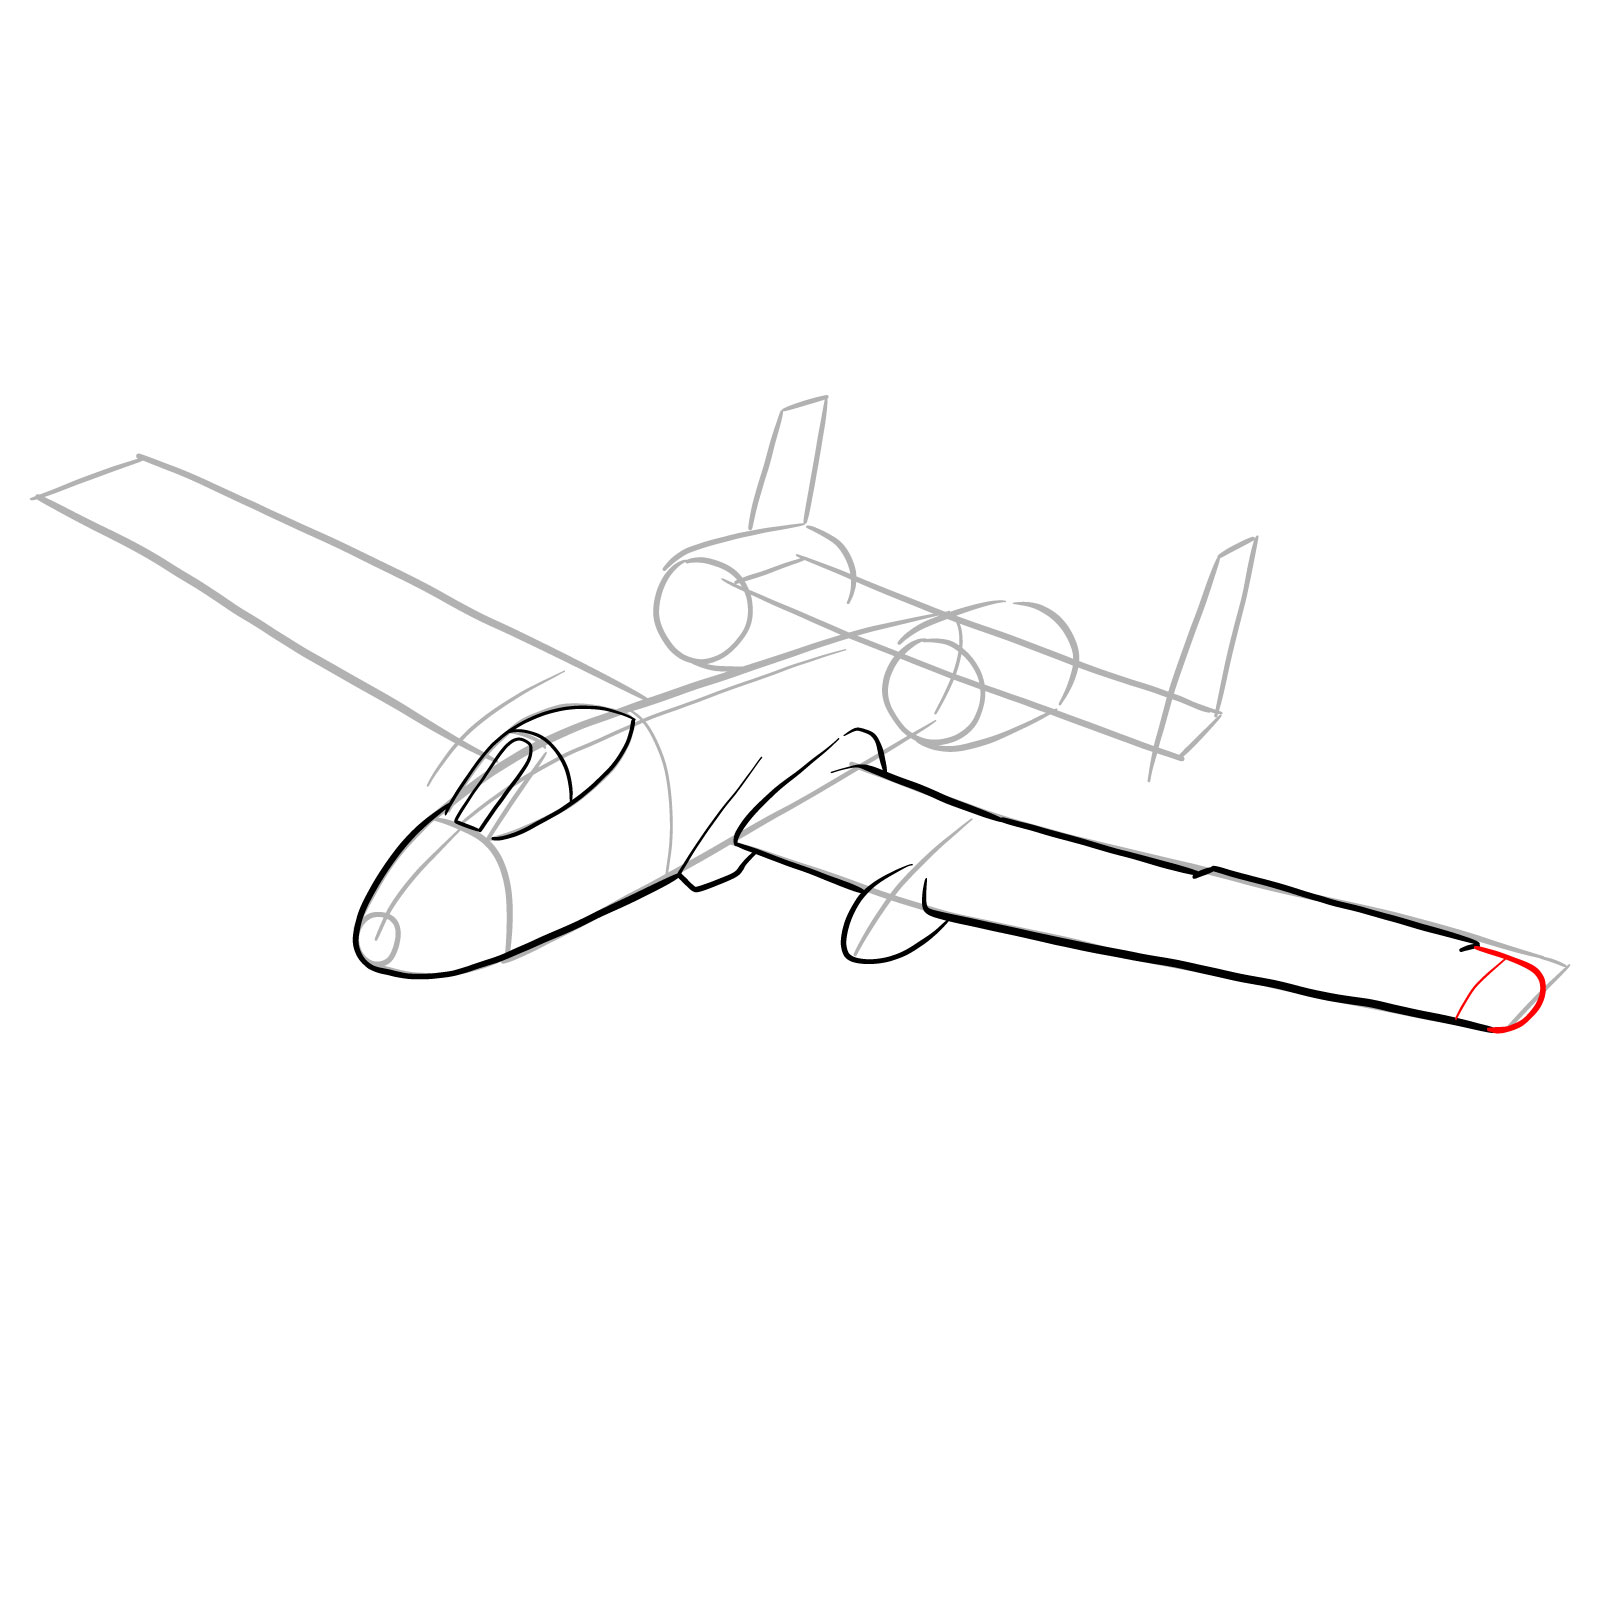 How to draw A-10 Thunderbolt II - step 11